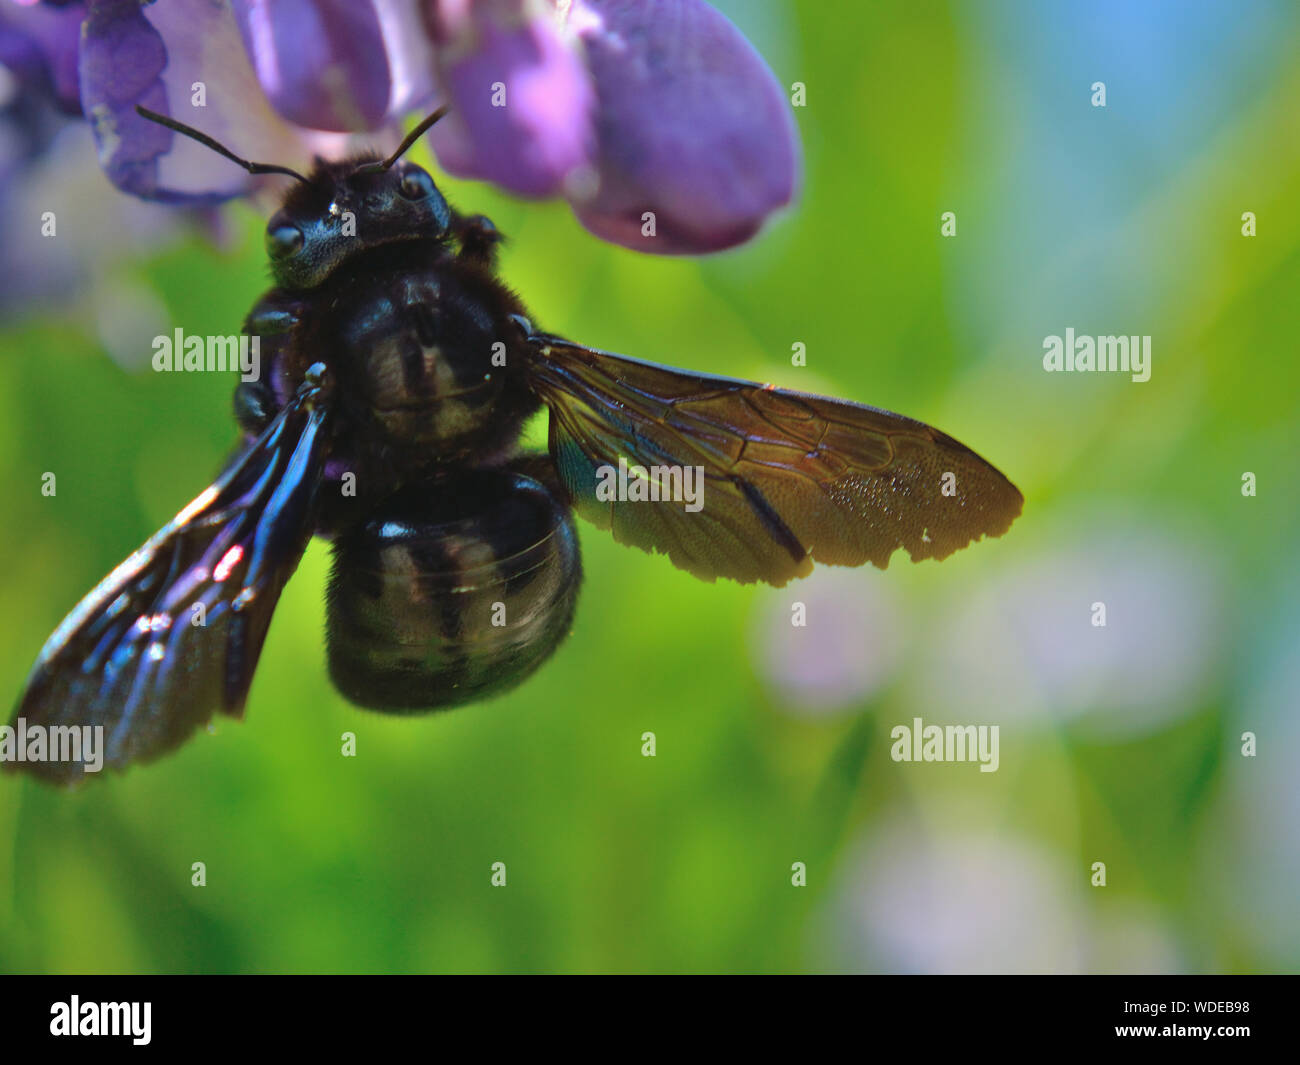 Close up of violet carpenter bee, Xylocopa violacea on purple flower Stock Photo